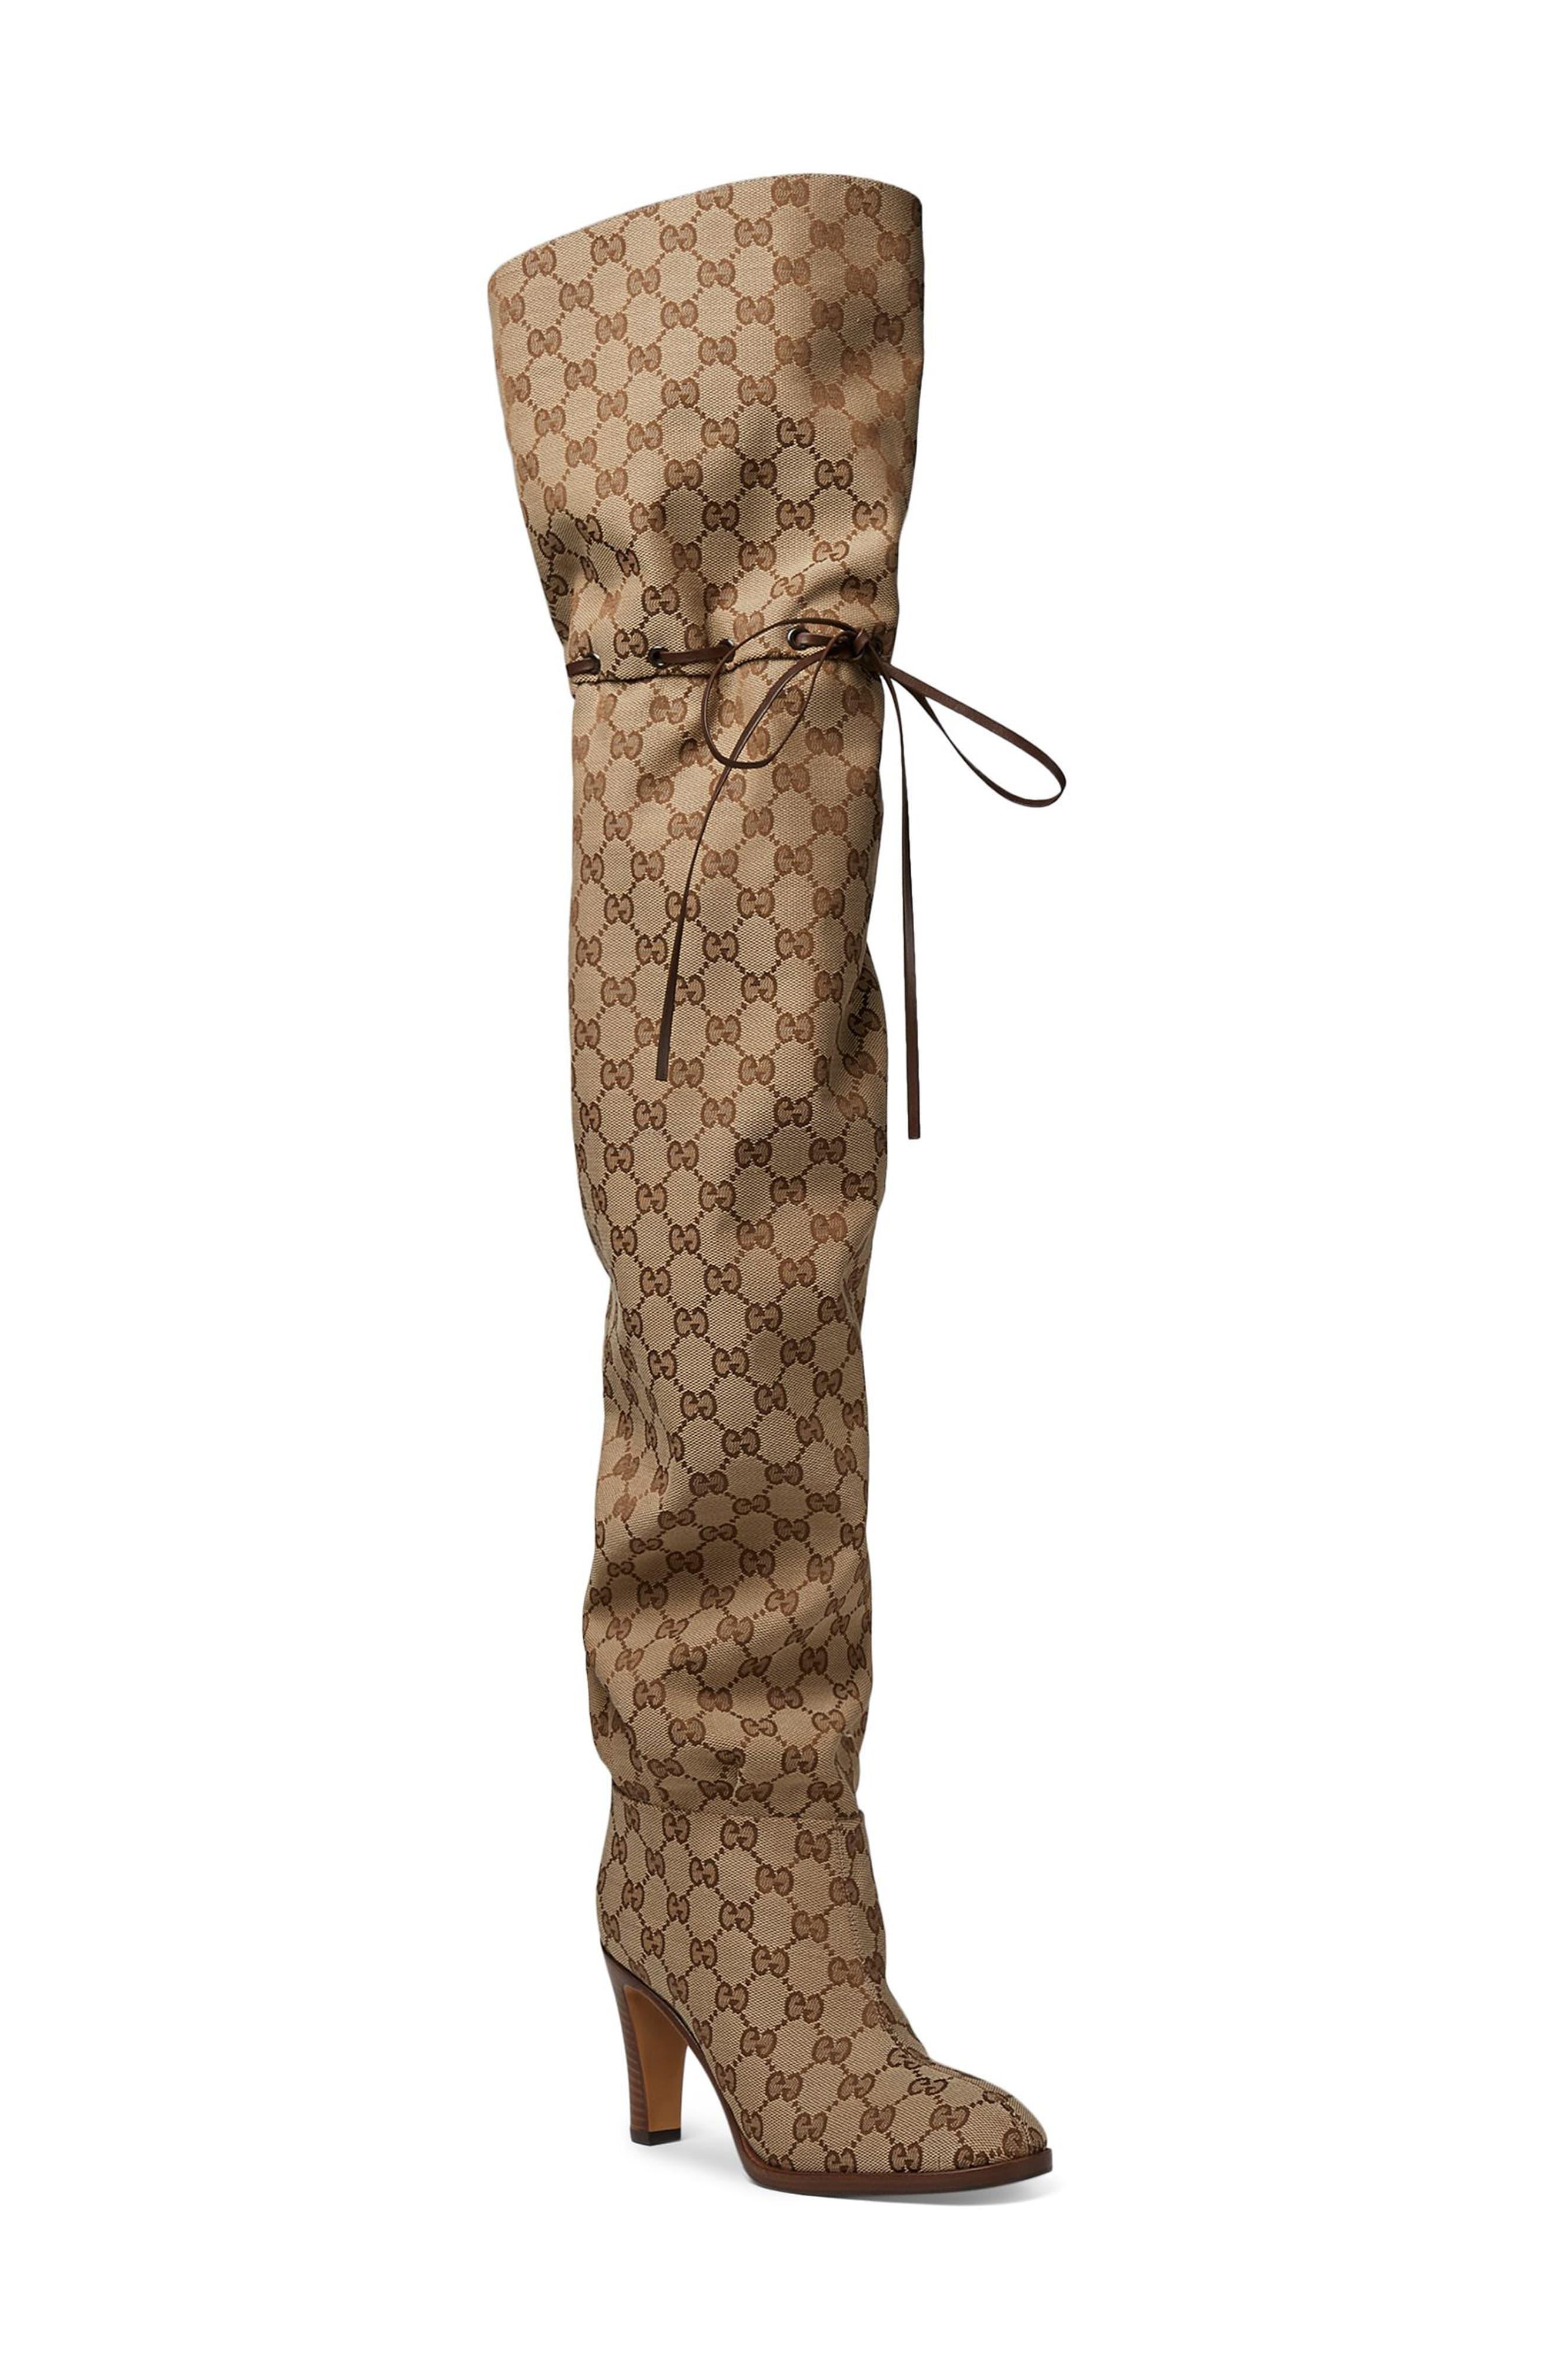 Gucci Original GG Canvas Over-the-knee Boot in Natural - Lyst